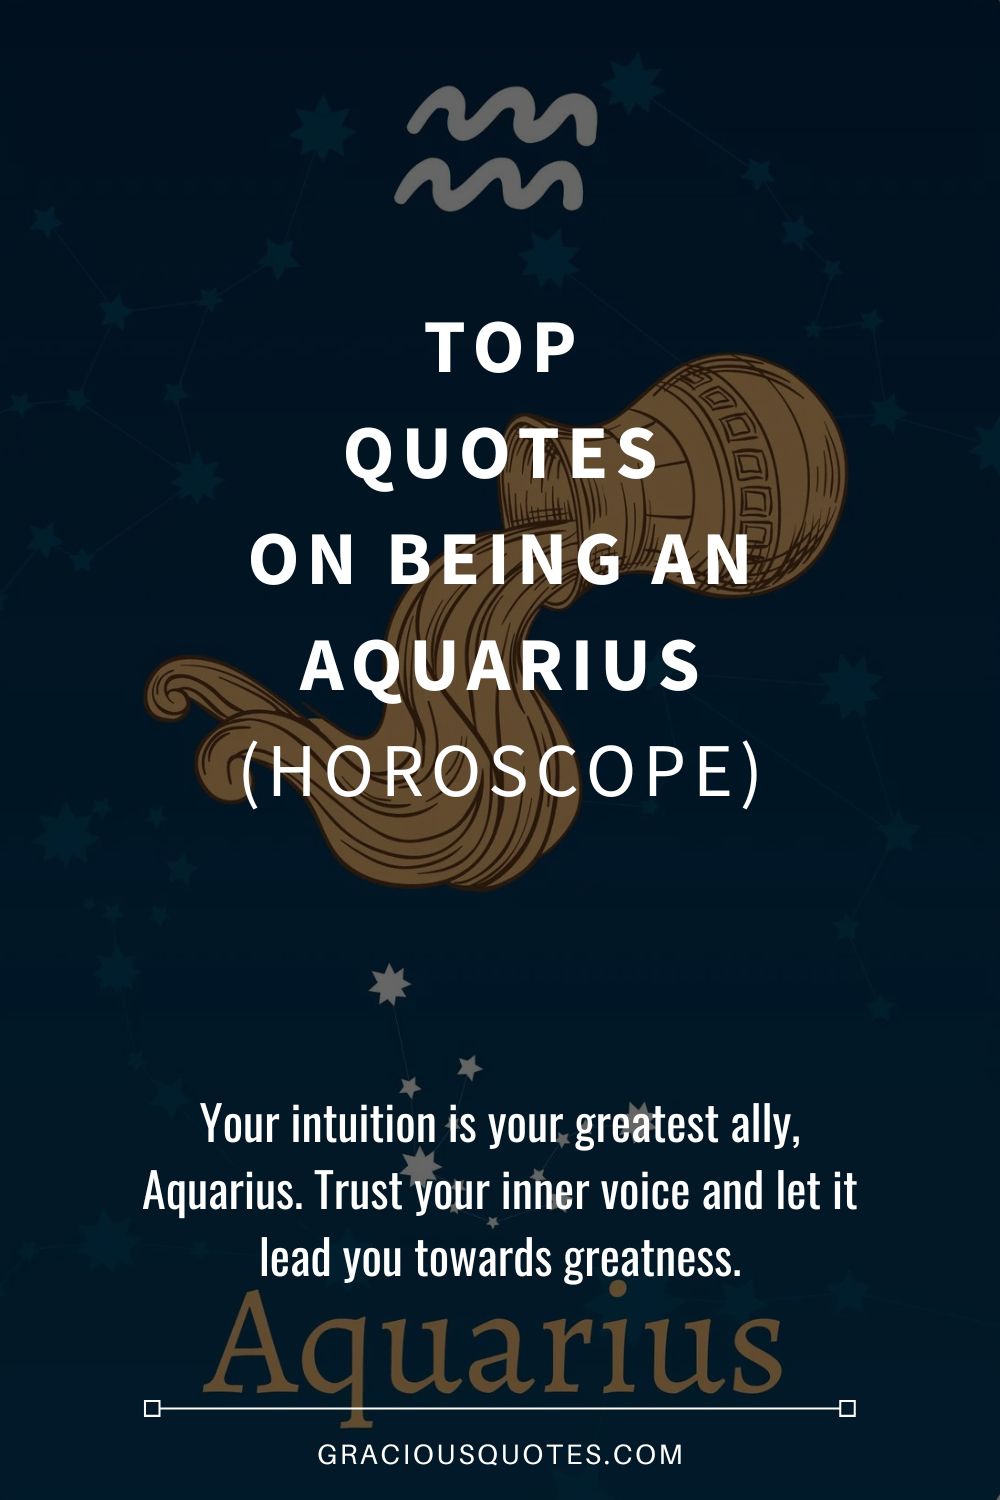 Top Quotes on Being an Aquarius (HOROSCOPE) - Gracious Quotes